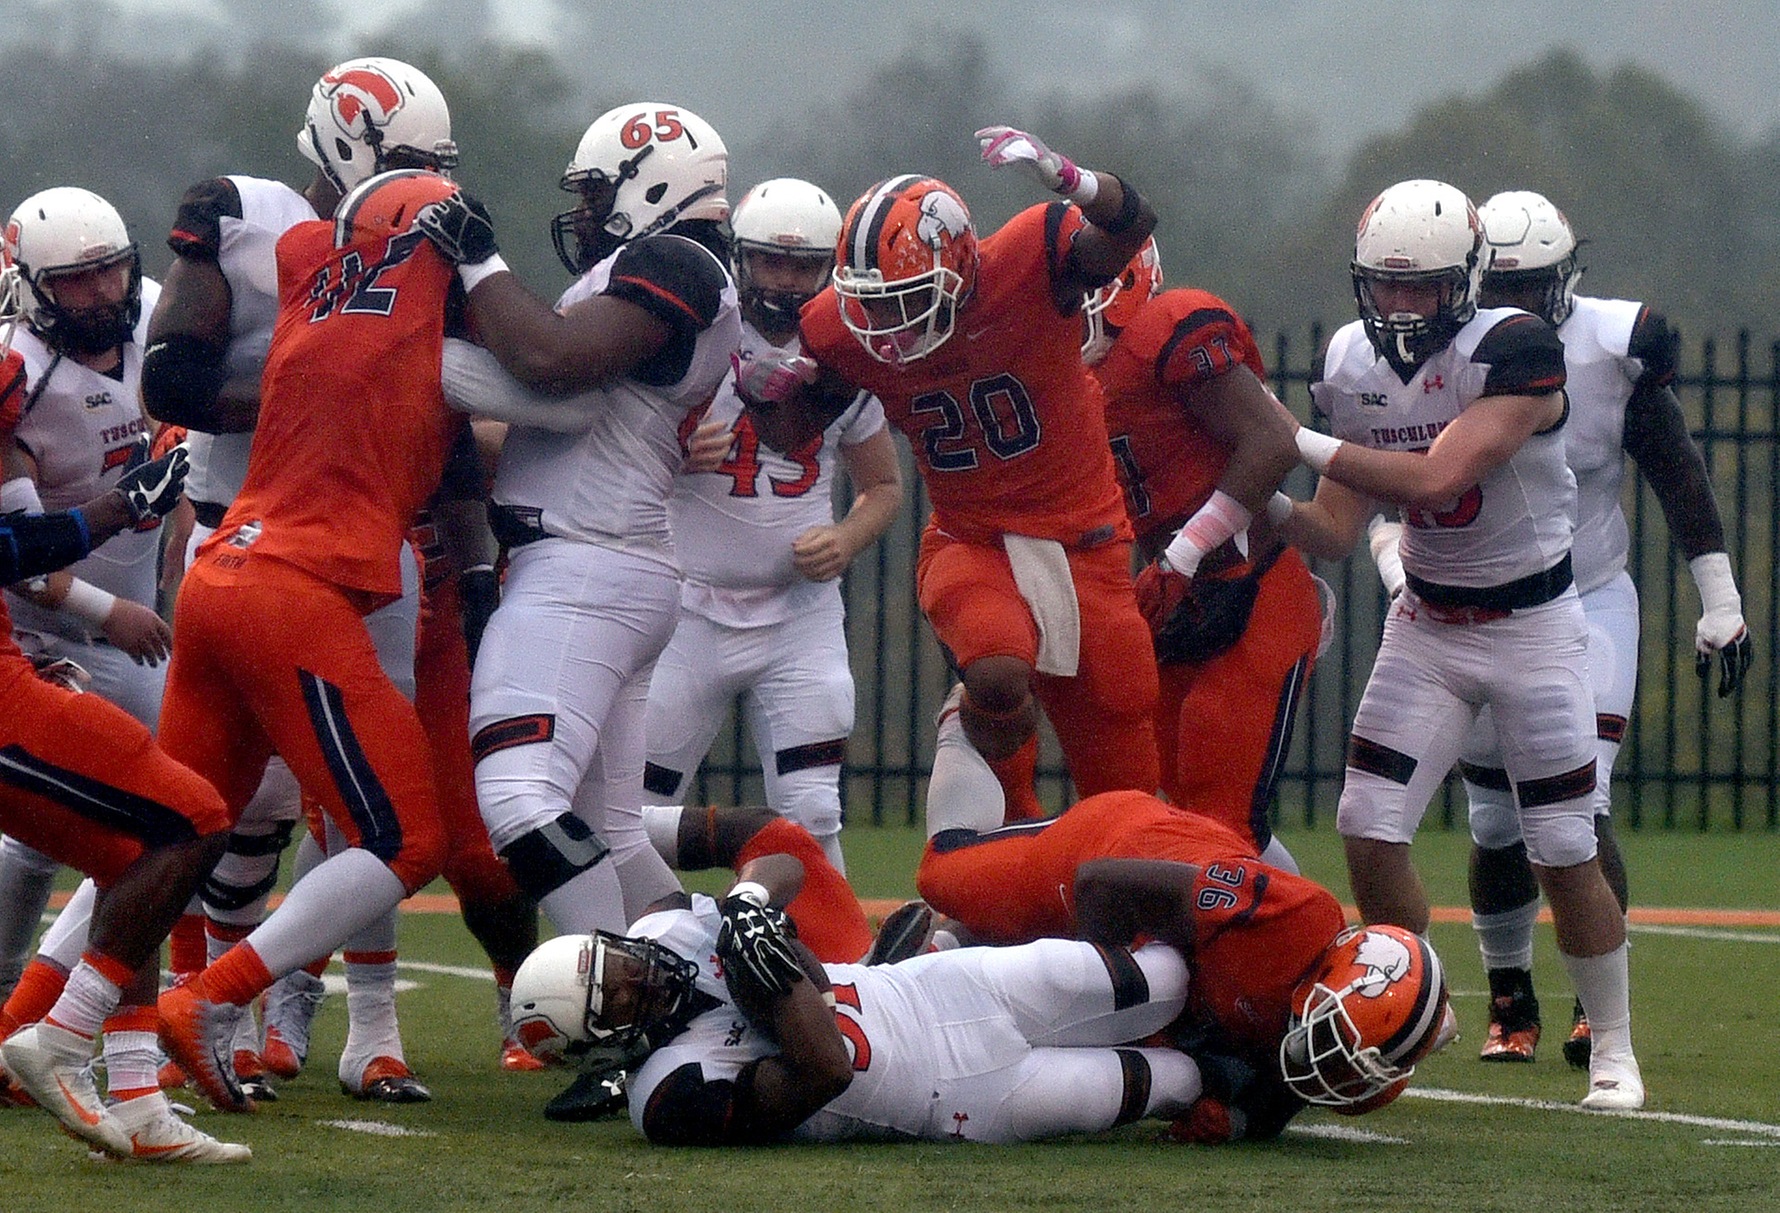 Carson-Newman Football Position Previews: The Linebackers